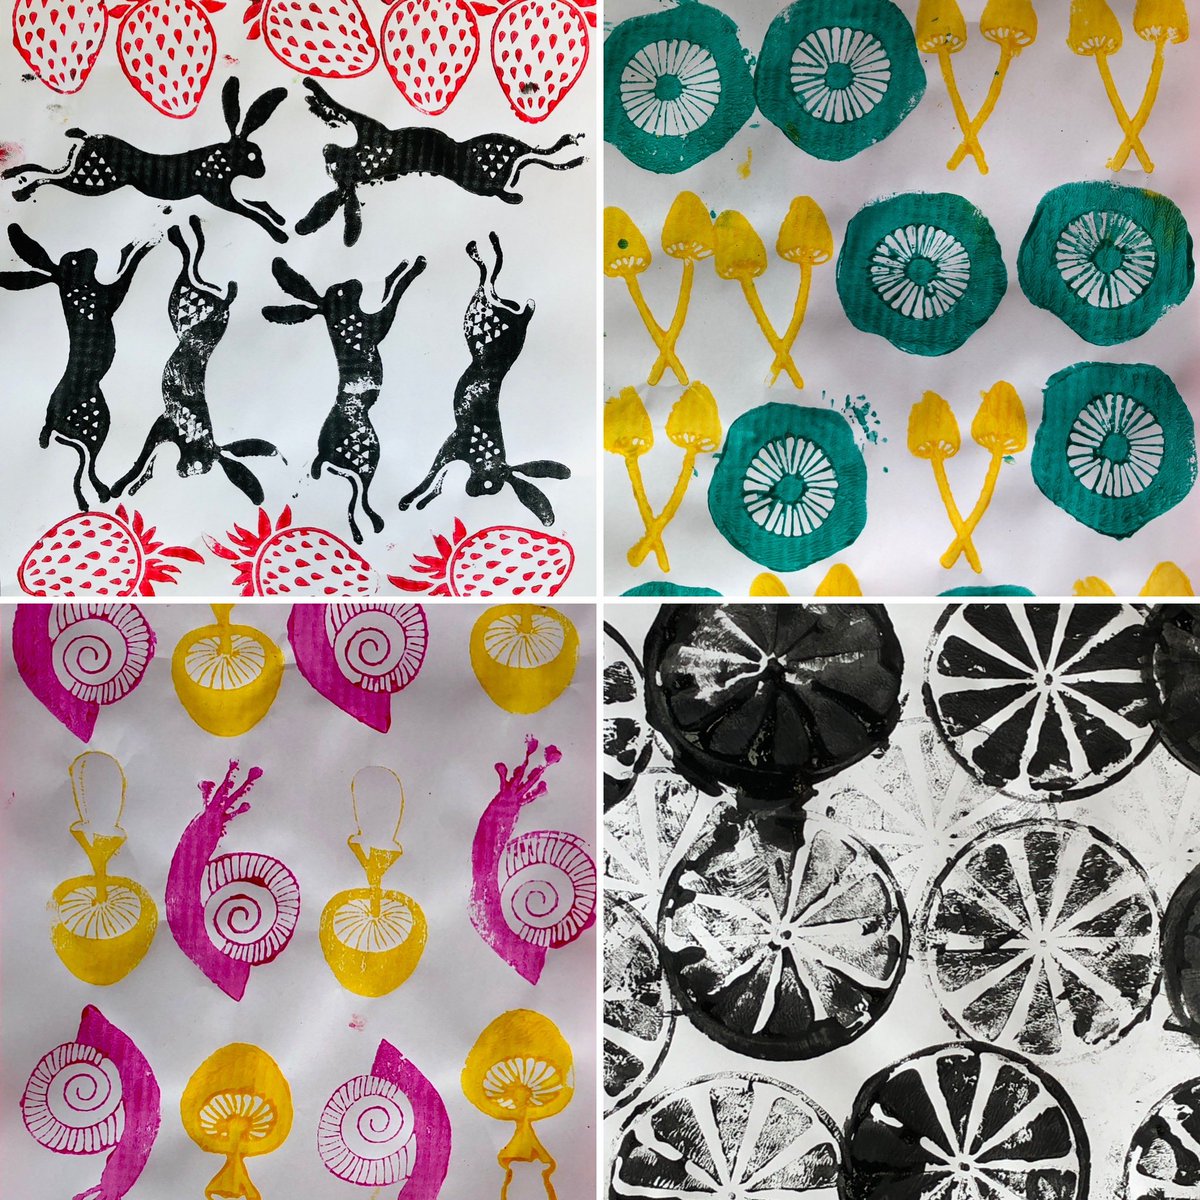 A brilliant job creating striking designs by @QueensburySch today during my printmaking workshop @touchbasepears I love the colour selection and pattern layouts. Great job everyone. I hope to see you back again soon.